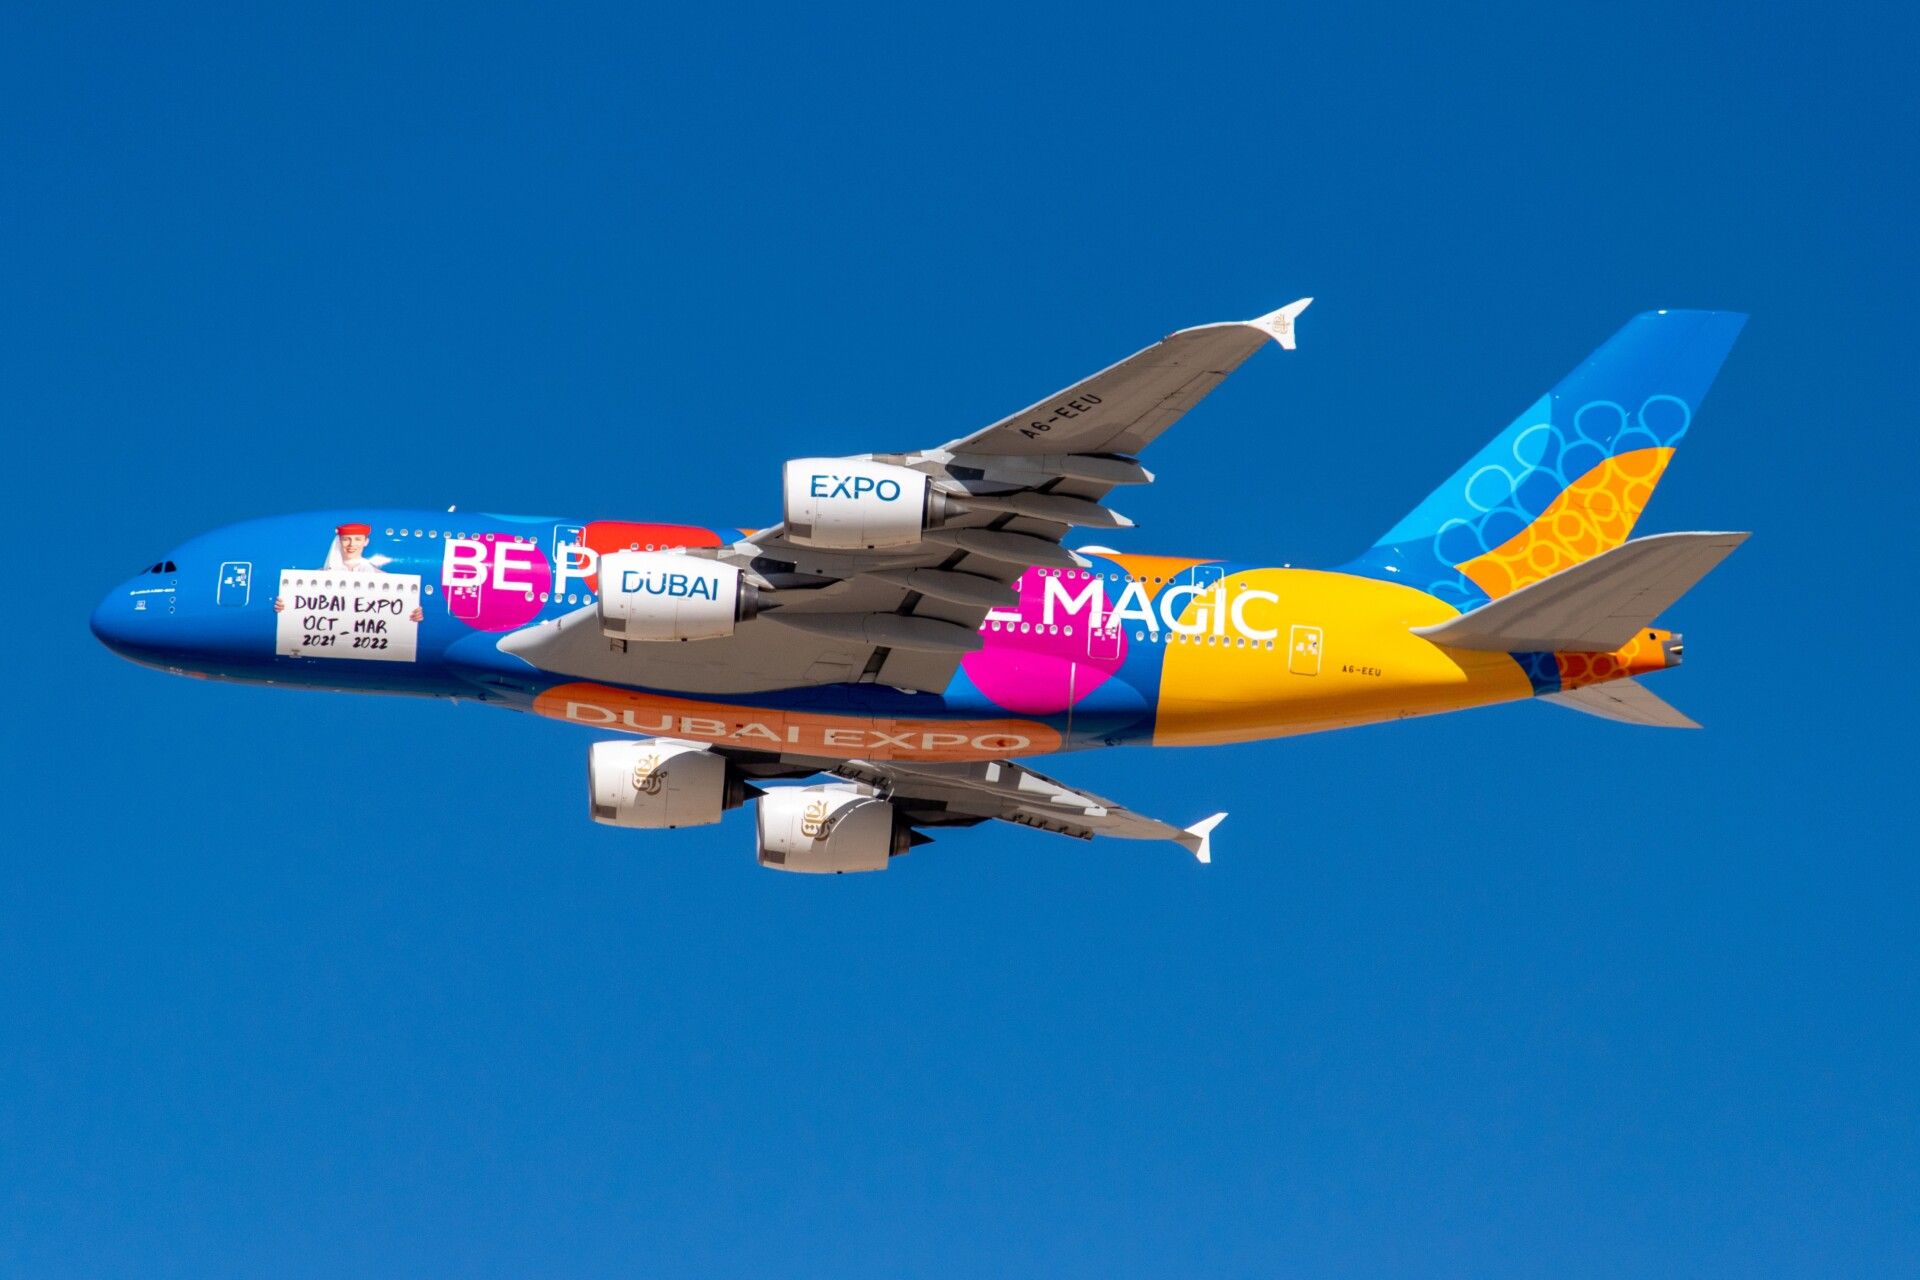 An Emirates Airbus A380 wearing the Expo 2020 livery.